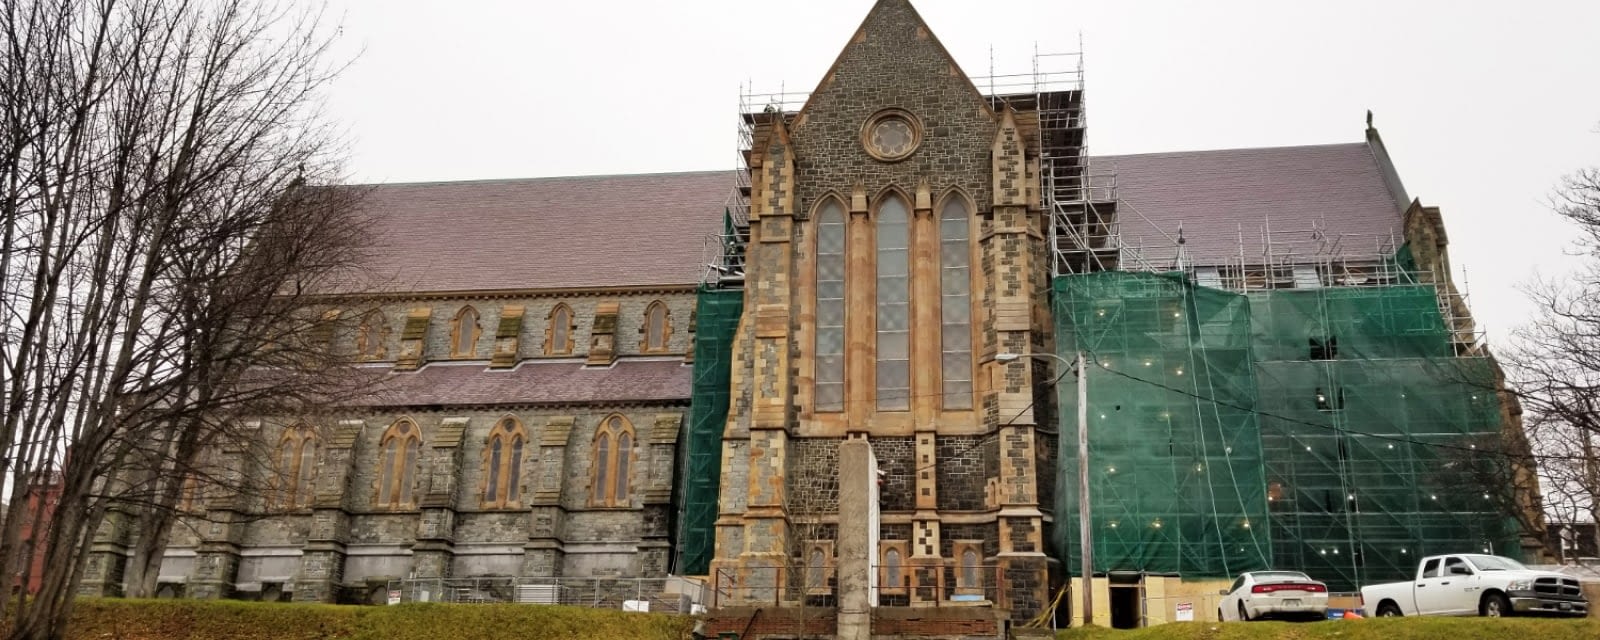 RTM roofing - St. John's Anglican Cathedral